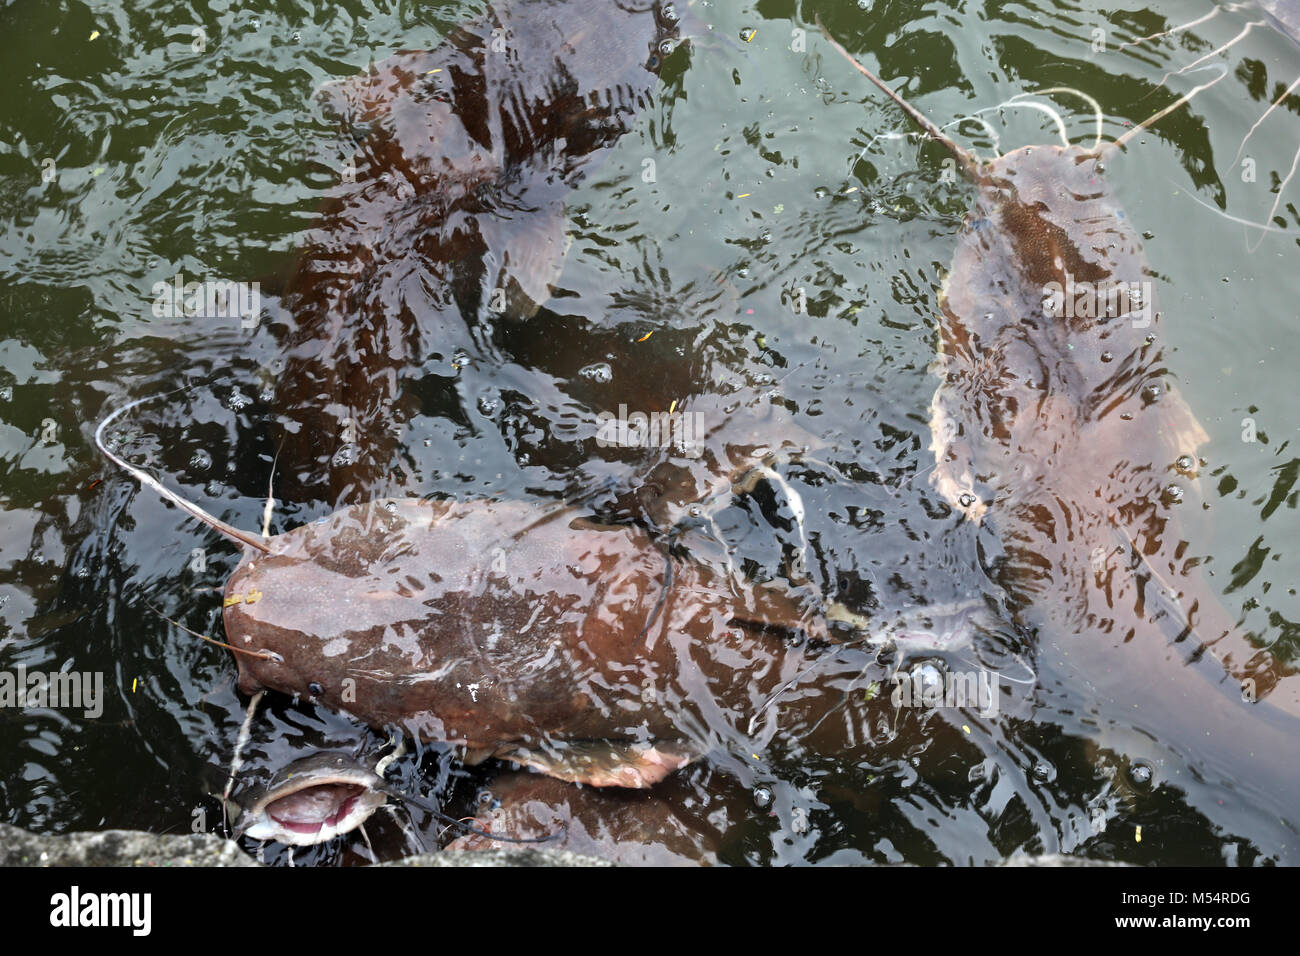 wels catfish are waiting for feeding by tourists Stock Photo